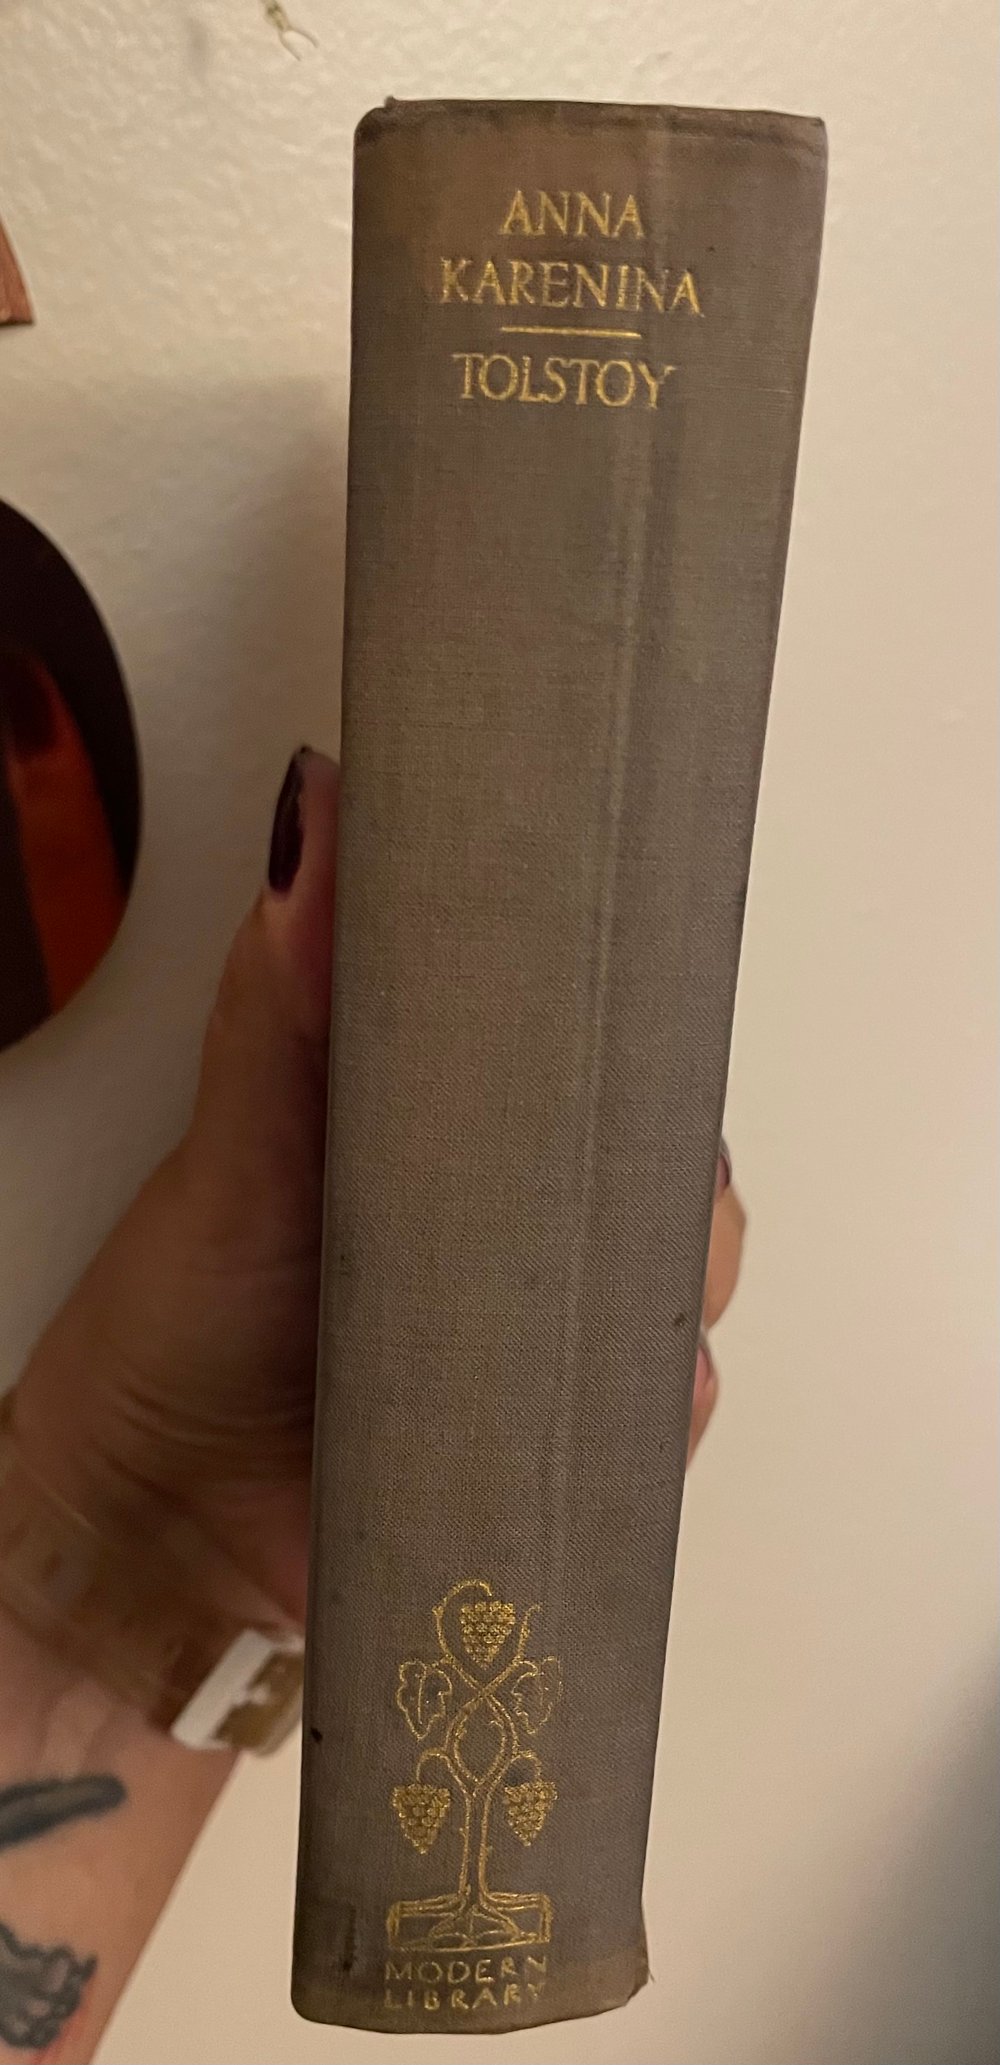 *EXTREMELY RARE* Anna Karenina by Leo Tolstoy First Edition 1930